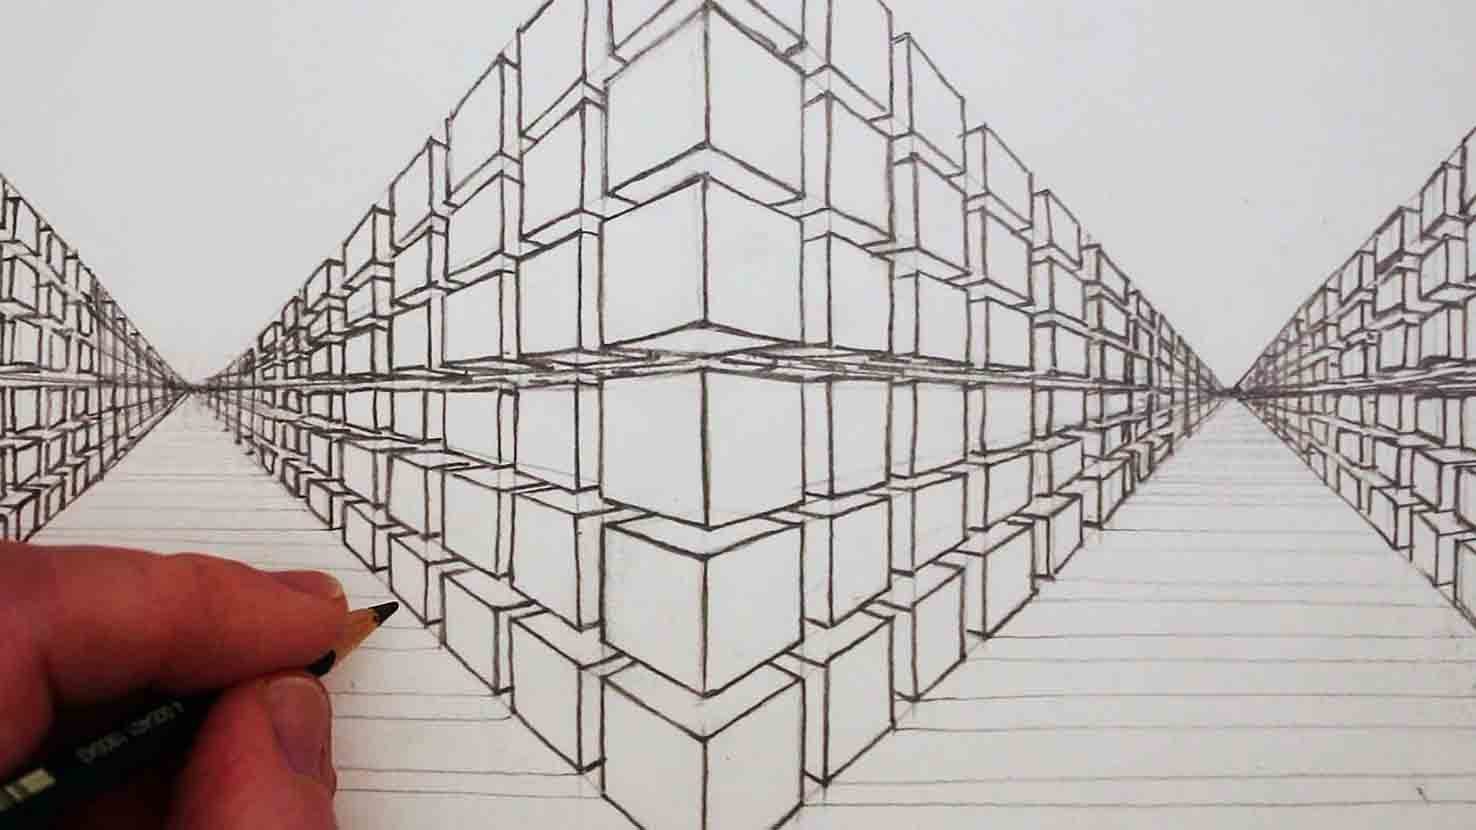 pencil and paper drawn perspective drawing.